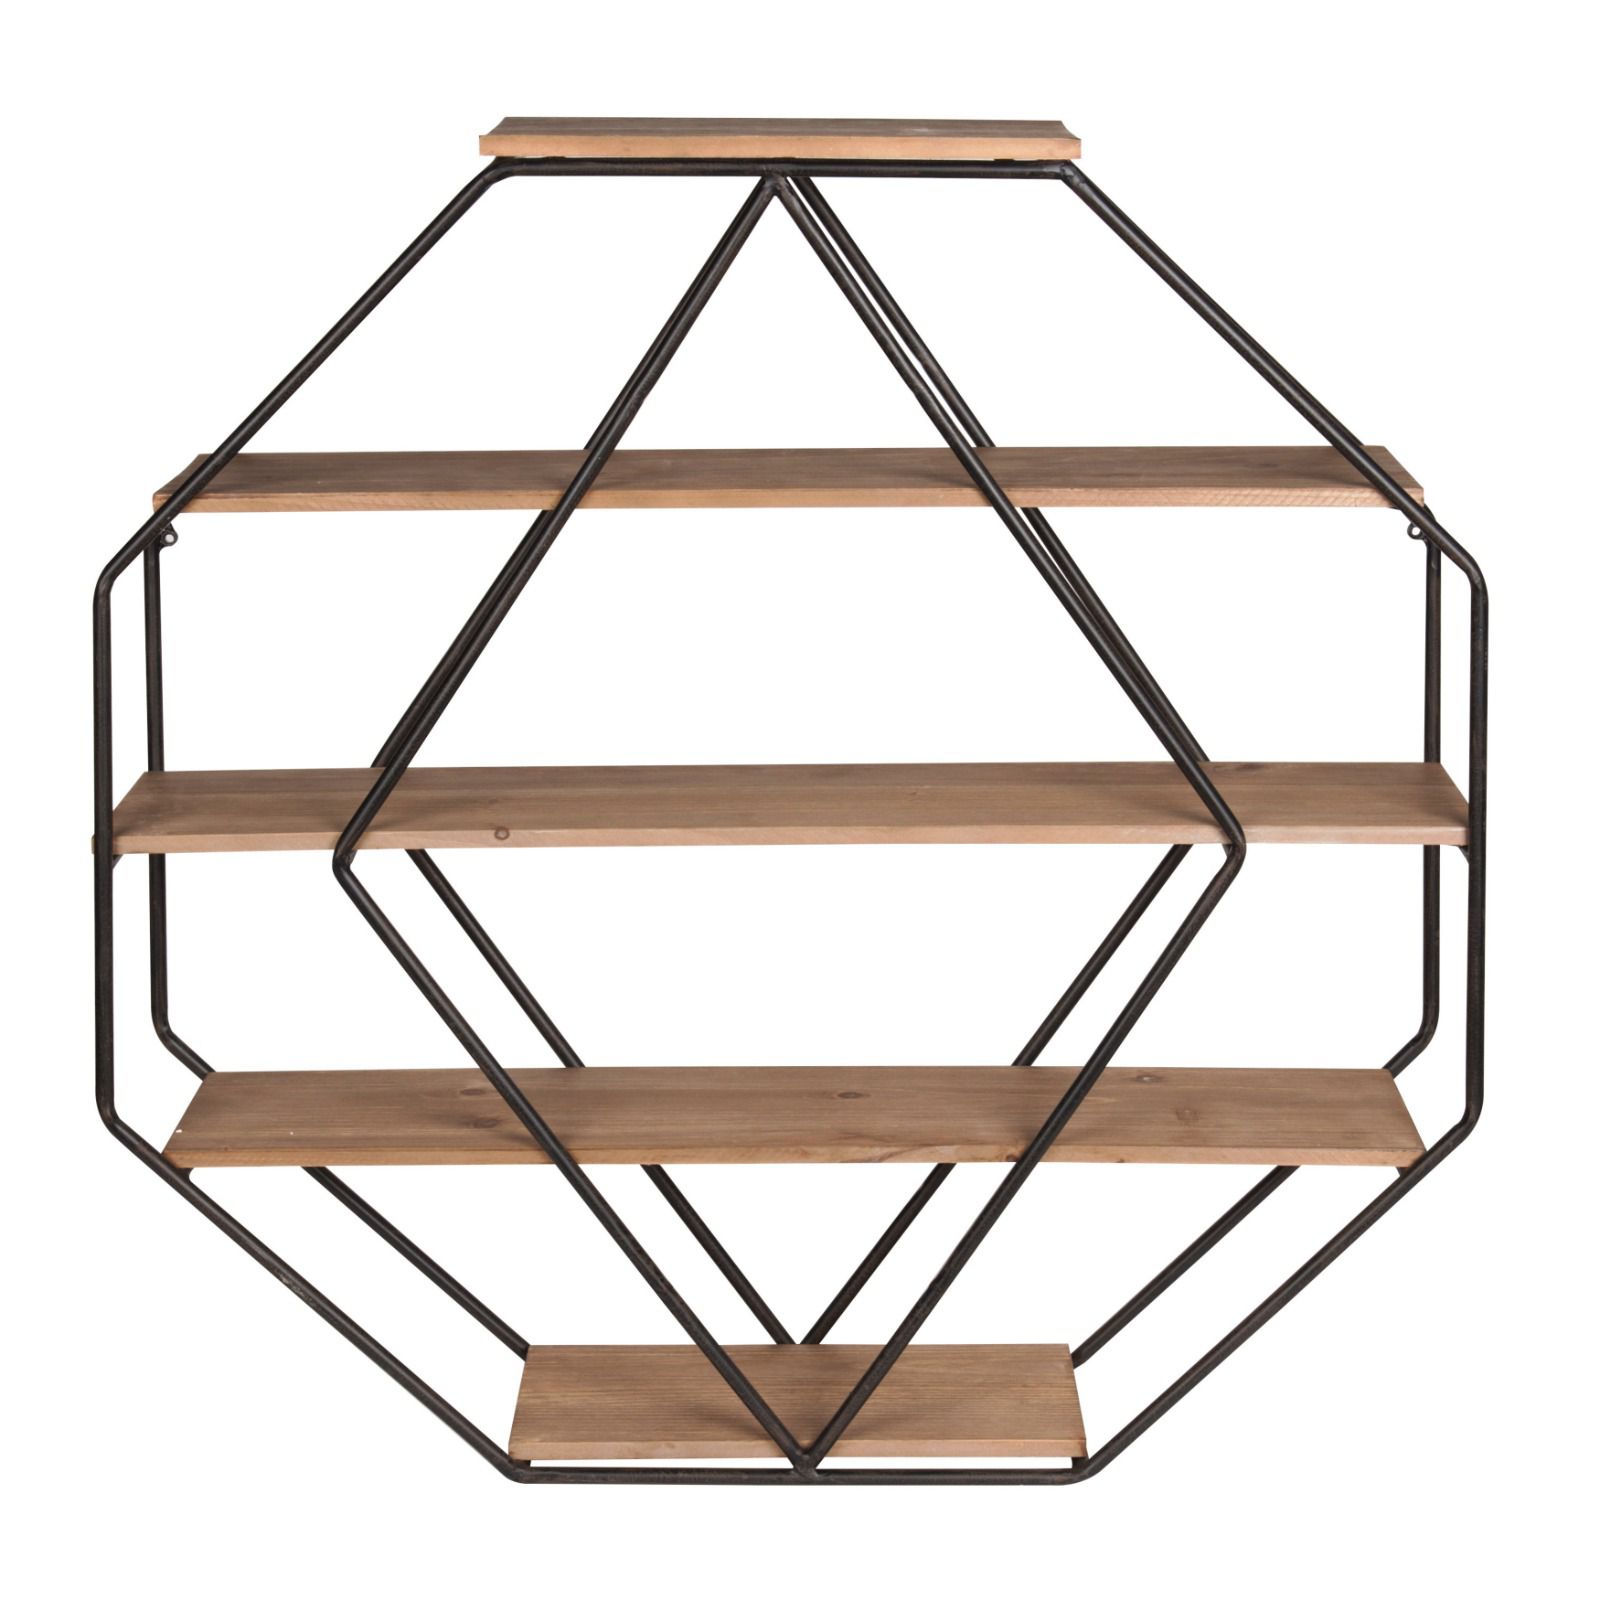 Kate and Laurel Lintz Large Octagon Shaped Floating Wood Book Shelves for Decorative Wall Display, Black Metal Frame with Rustic Brown Shelves